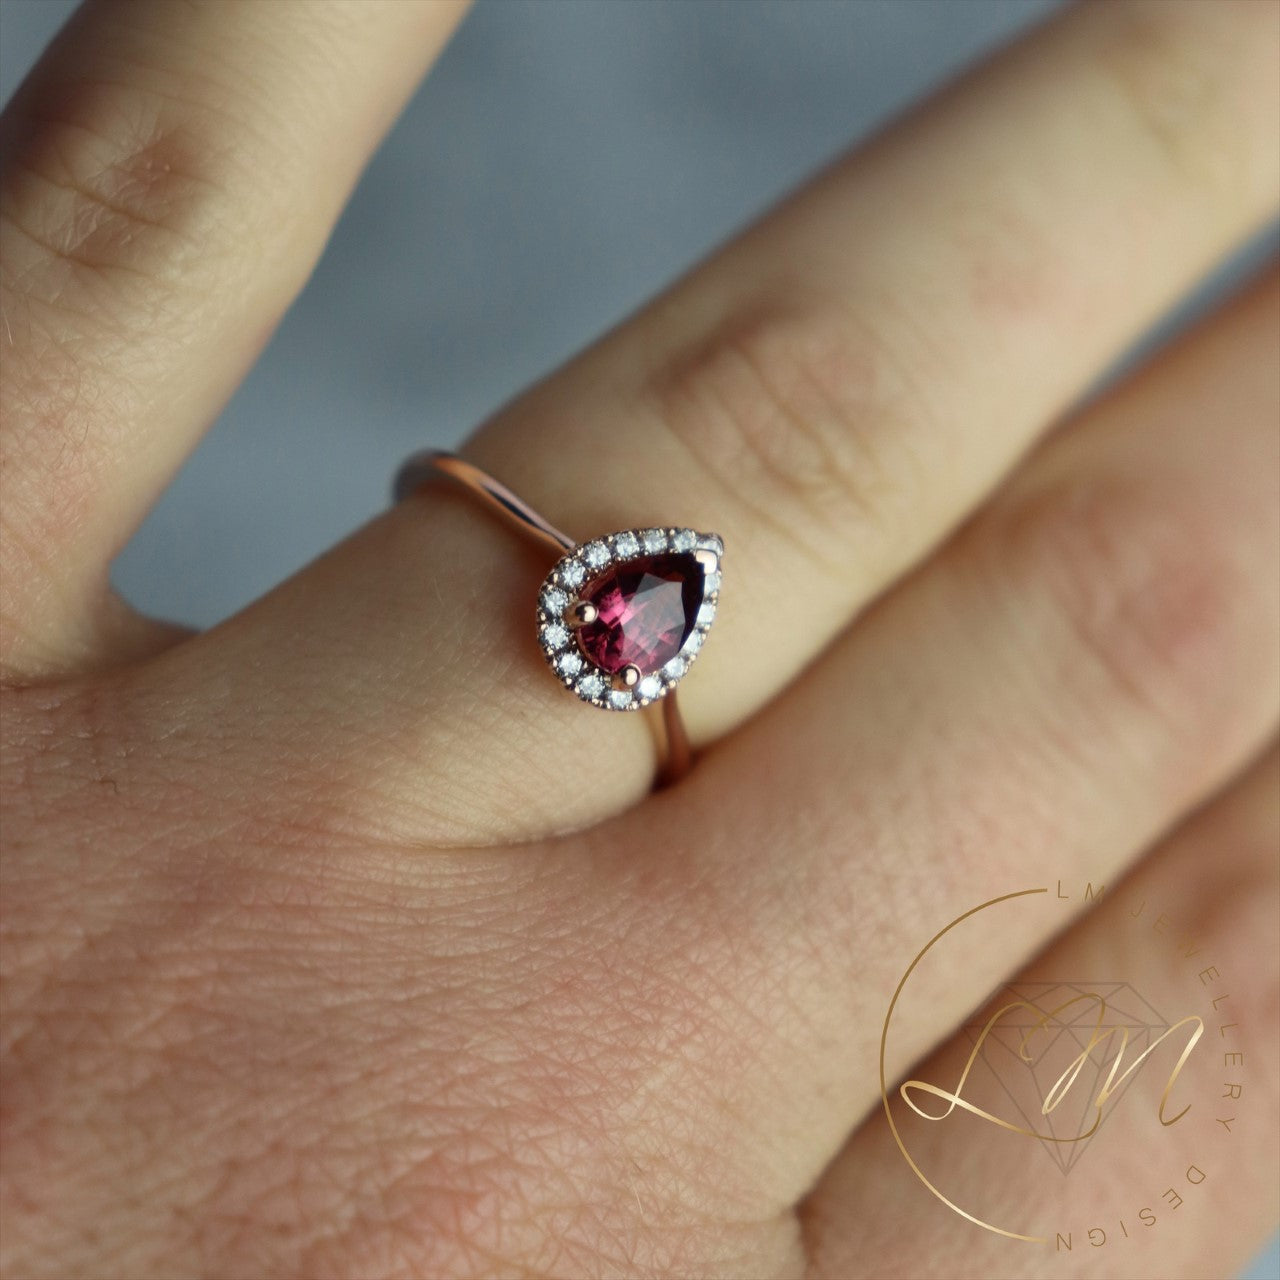 14ct Rose Gold Pear Spinel & Diamond Halo Ring